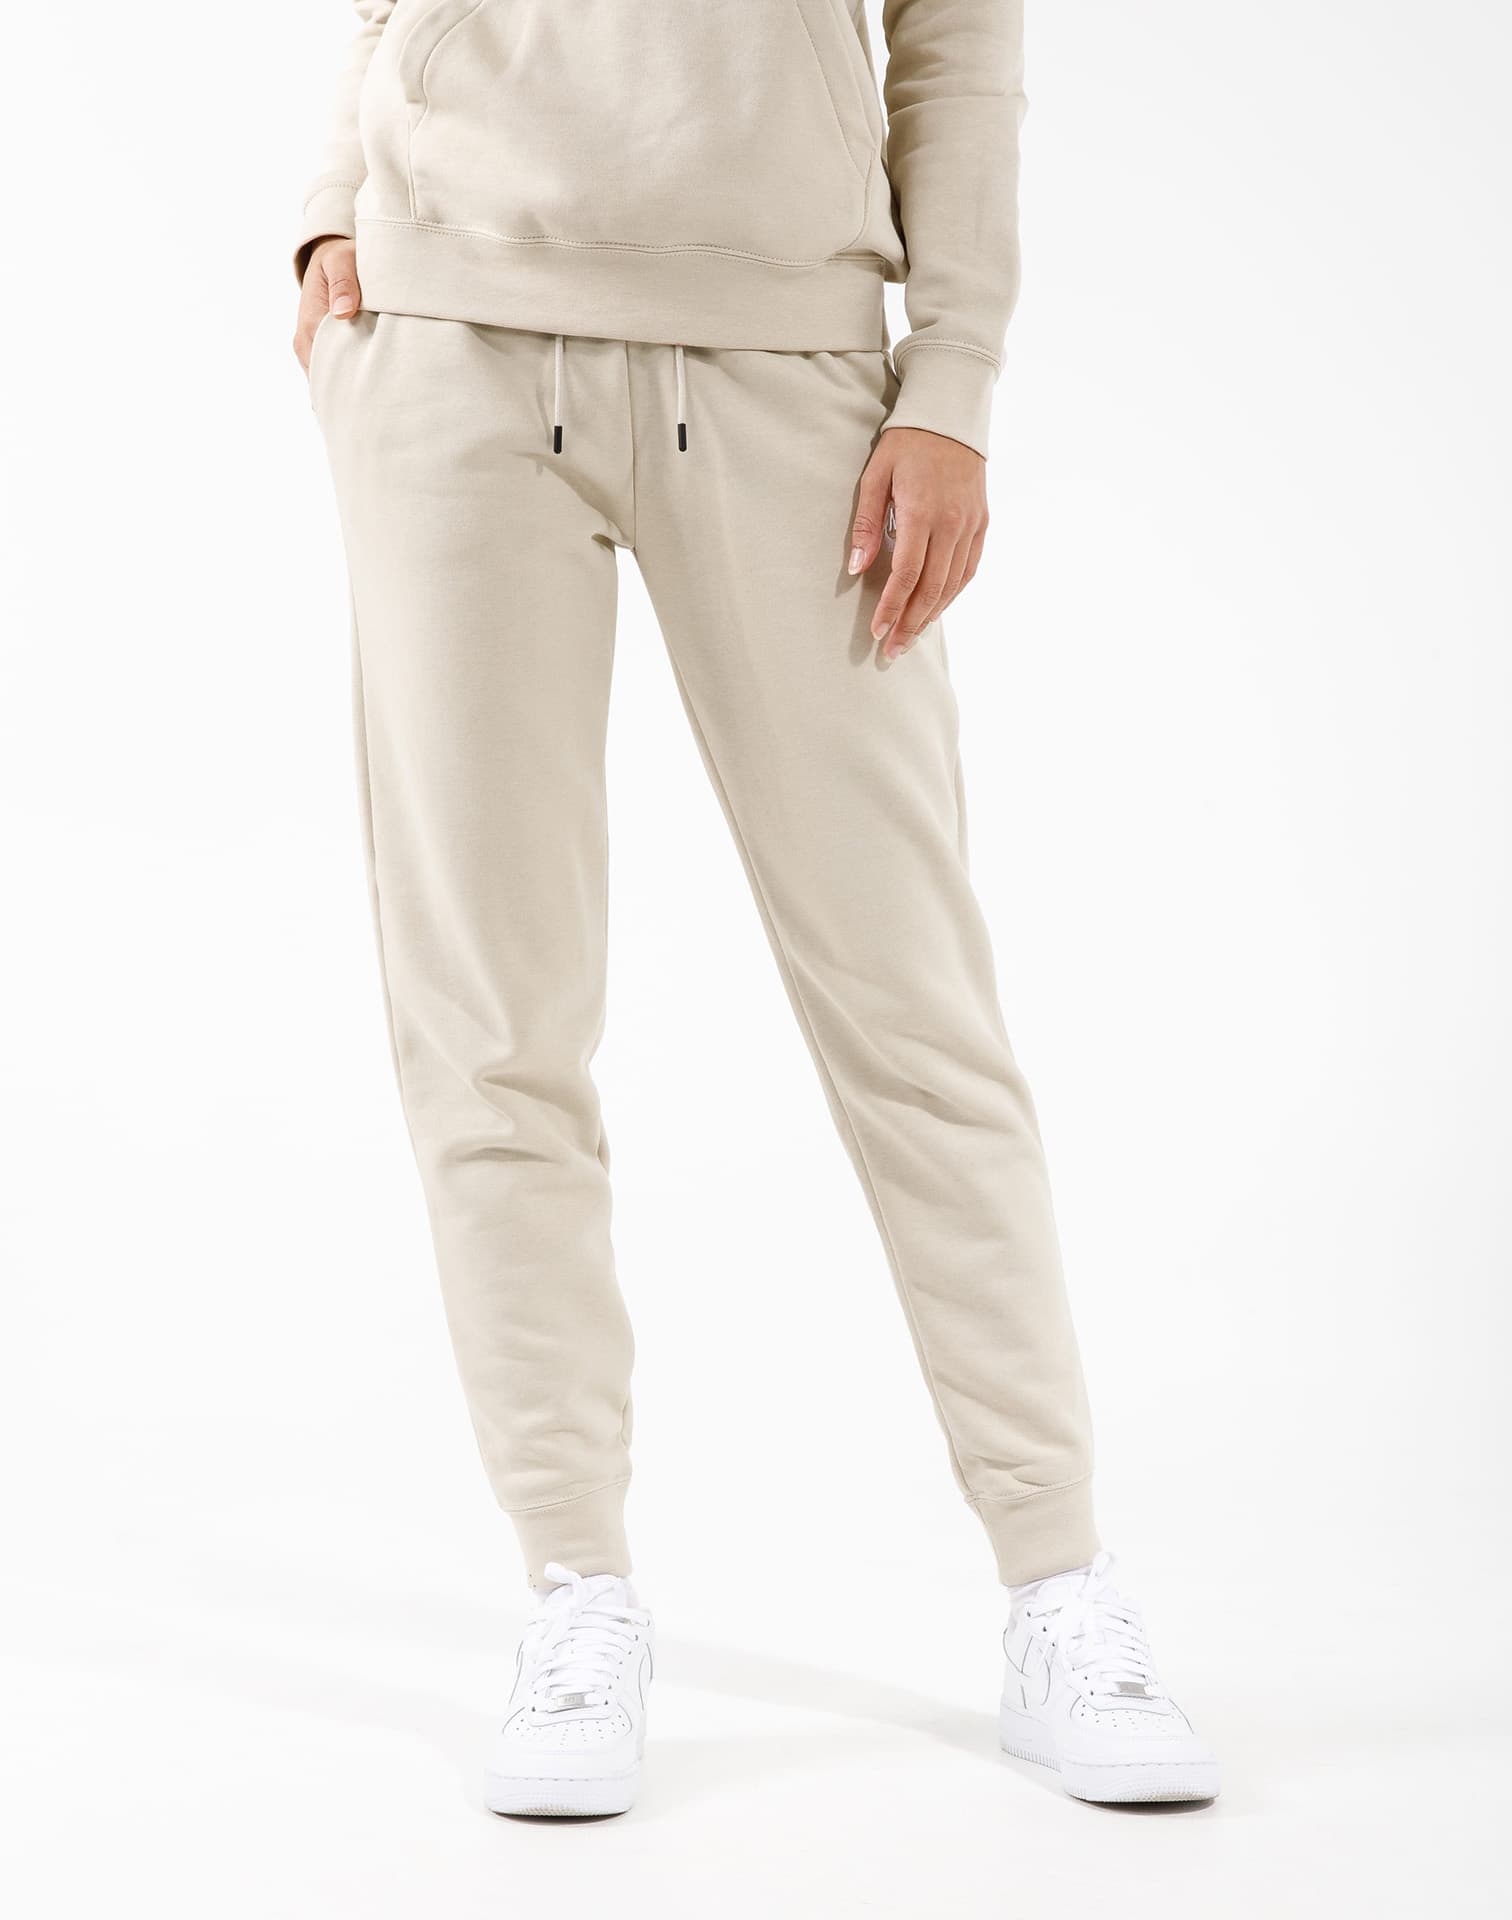 Nike - Wmns NSW Essentials Collection Fleece Pant